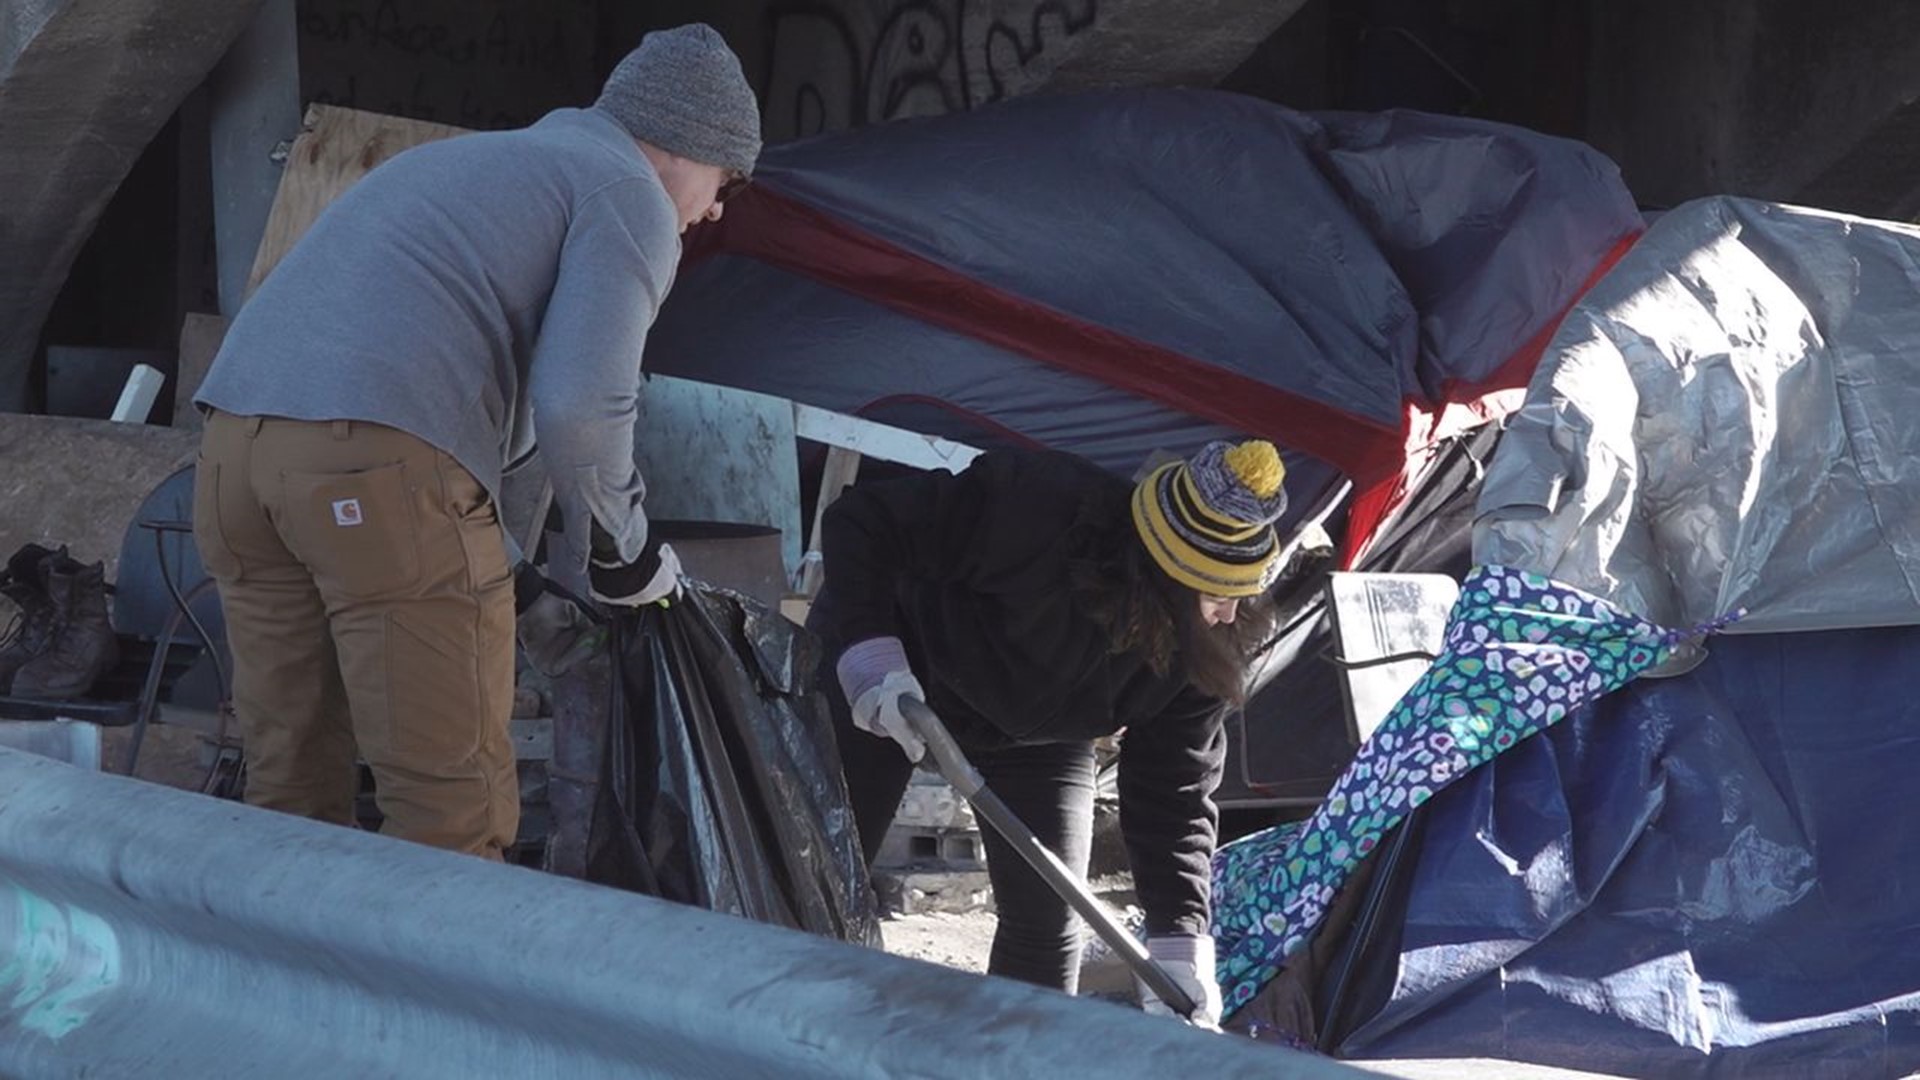 The city has reportedly found a new place for people living in the encampment to relocate to.